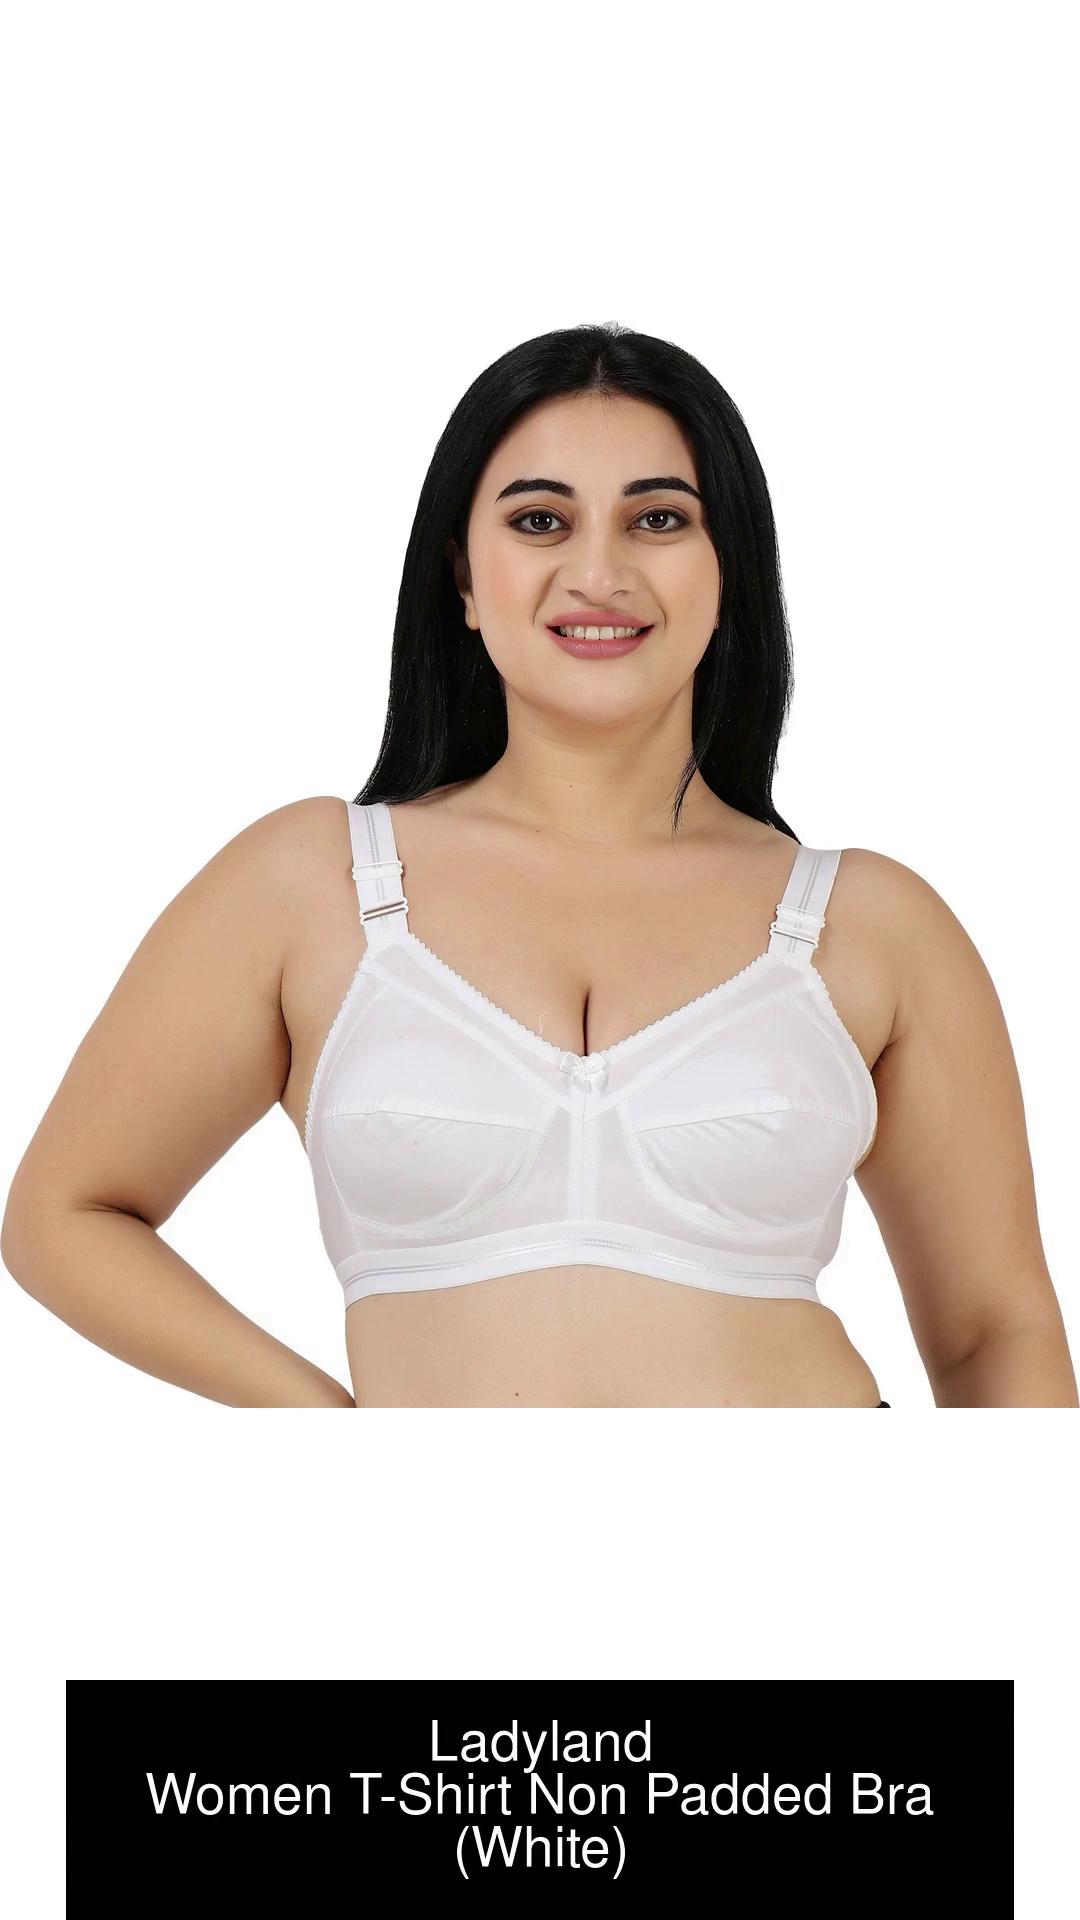 Ladyland Women T-shirt Non Padded Bra - 46c, White at Rs 286/piece